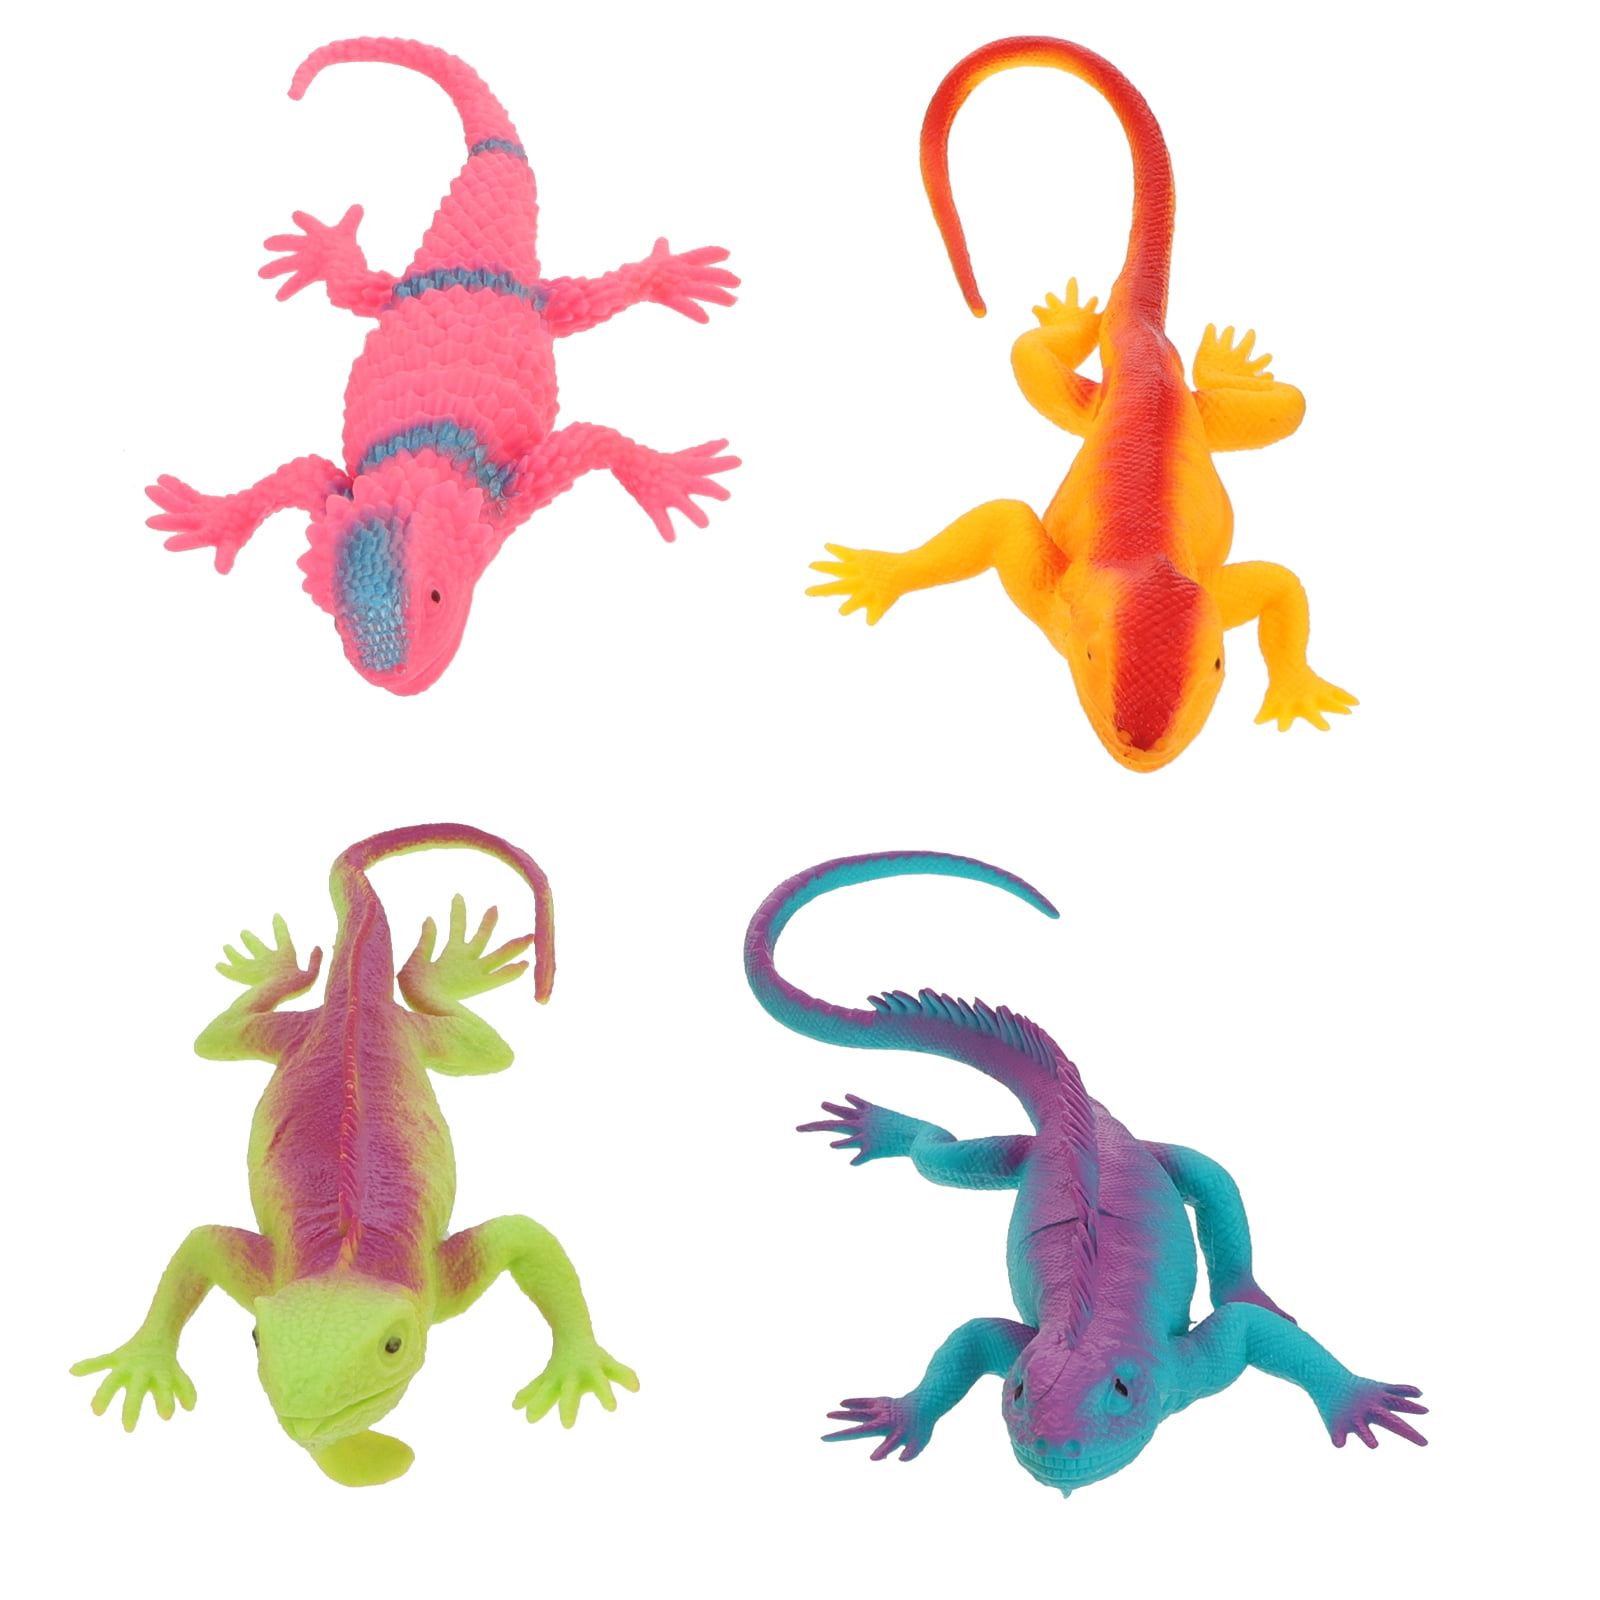 Lizard Toy Lizards Model Toys Reptile Animal Figures Rubber Realistic ...